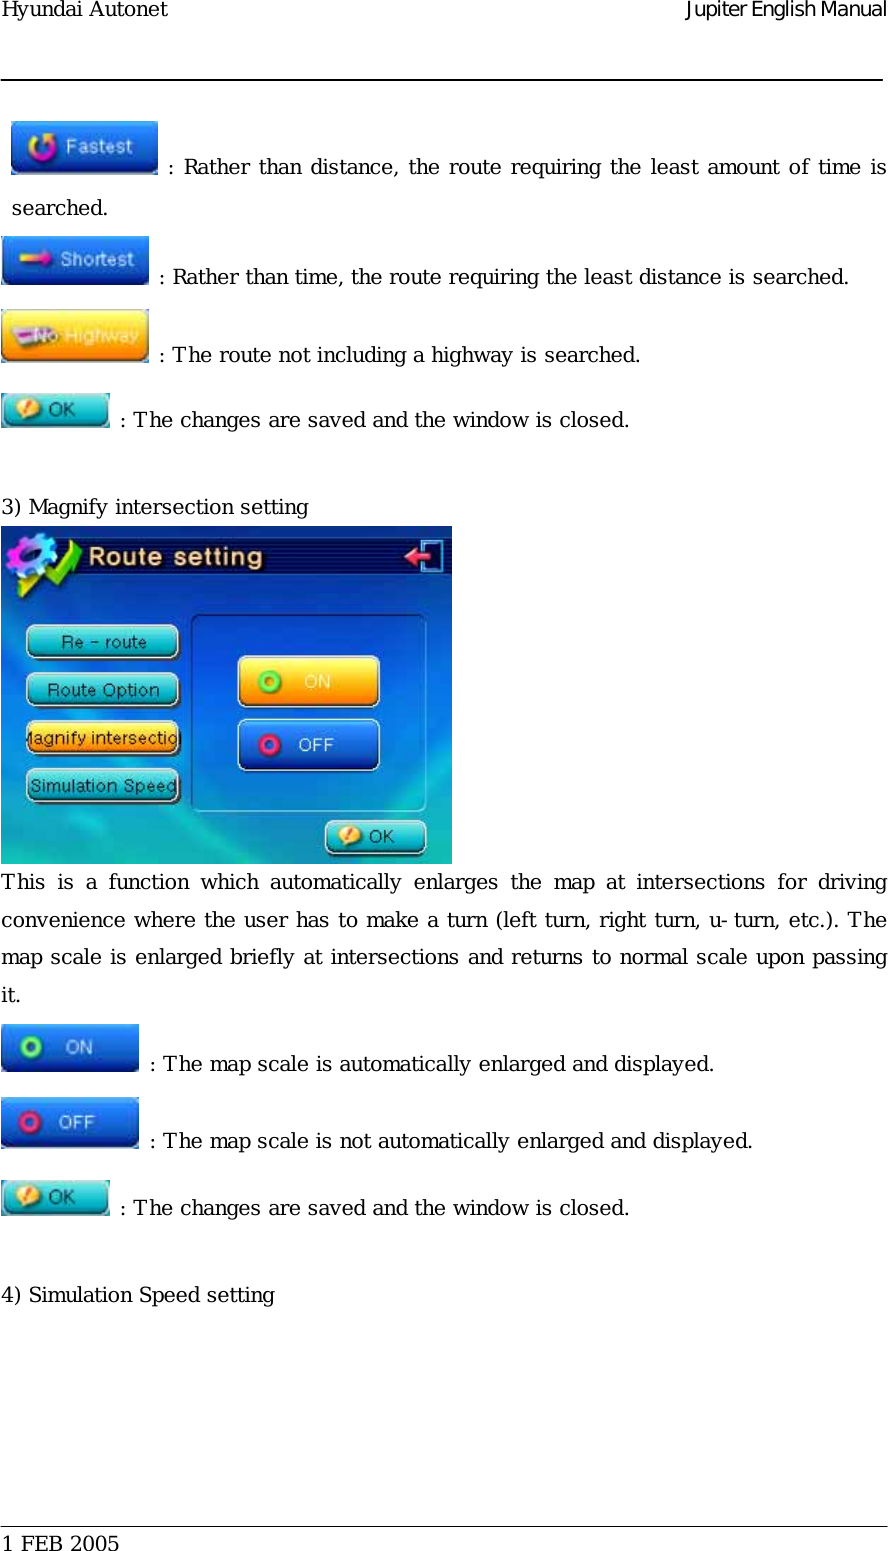 Hyundai Autonet    Jupiter English Manual  : Rather than distance, the route requiring the least amount of time is searched.   : Rather than time, the route requiring the least distance is searched.   : The route not including a highway is searched.   : The changes are saved and the window is closed.   3) Magnify intersection setting  This is a function which automatically enlarges the map at intersections  for  driving convenience where the user has to make a turn (left turn, right turn, u-turn, etc.). The map scale is enlarged briefly at intersections and returns to normal scale upon passing it.   : The map scale is automatically enlarged and displayed.   : The map scale is not automatically enlarged and displayed.   : The changes are saved and the window is closed.   4) Simulation Speed setting  1 FEB 2005    